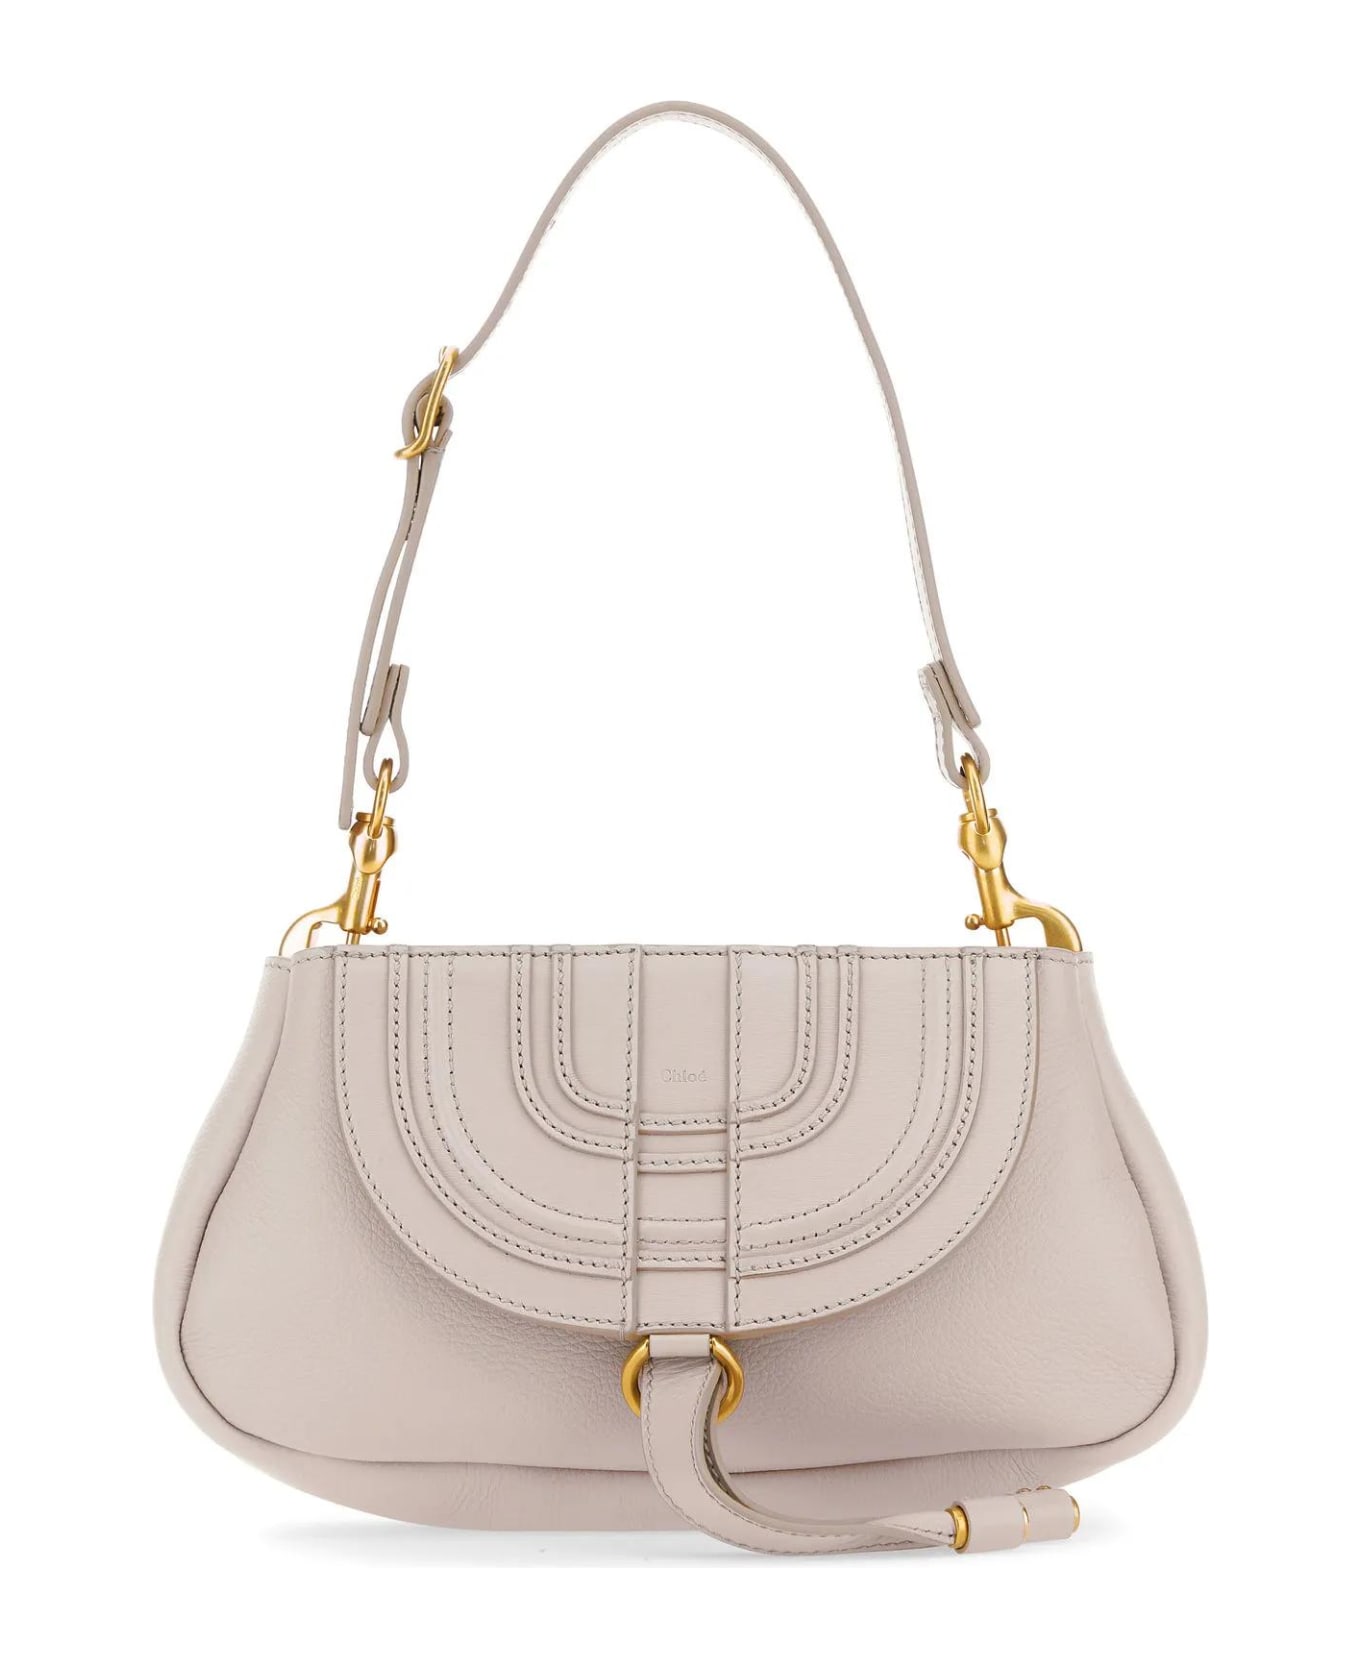 Chloé Light Pink Leather Small Marcie Clutch - Grey トートバッグ